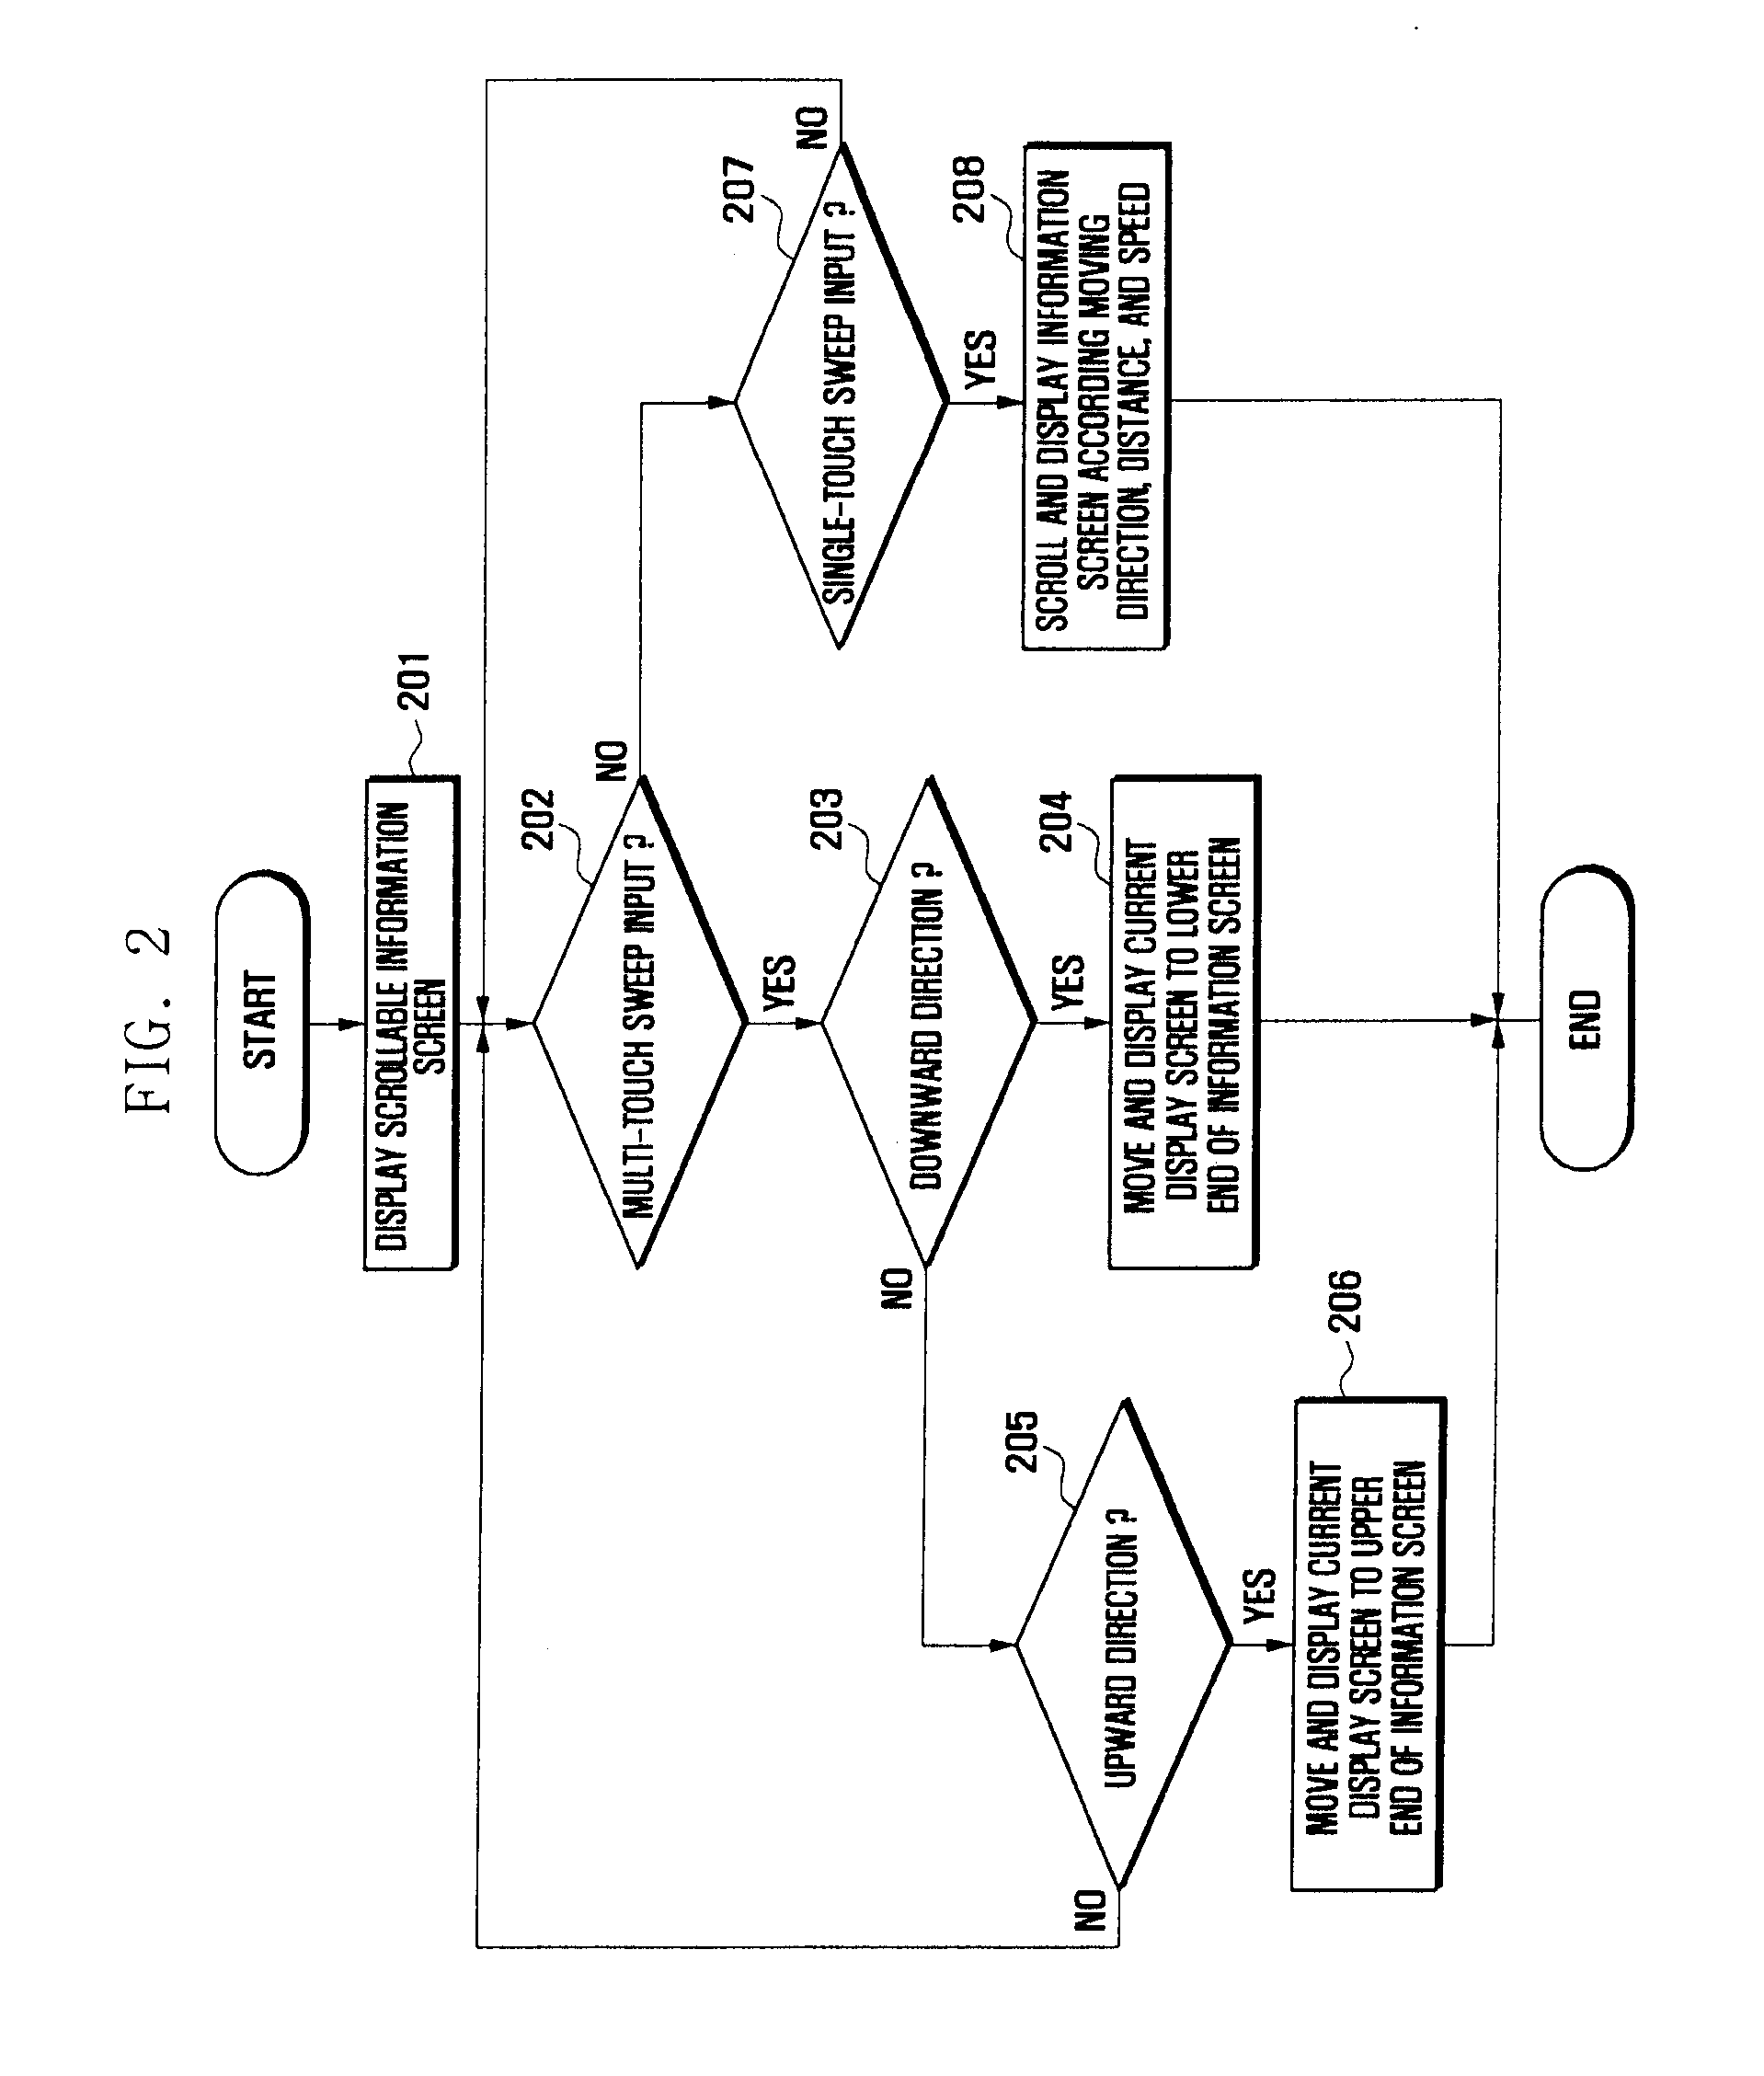 Method and apparatus for controlling touch screen in mobile terminal responsive to multi-touch inputs